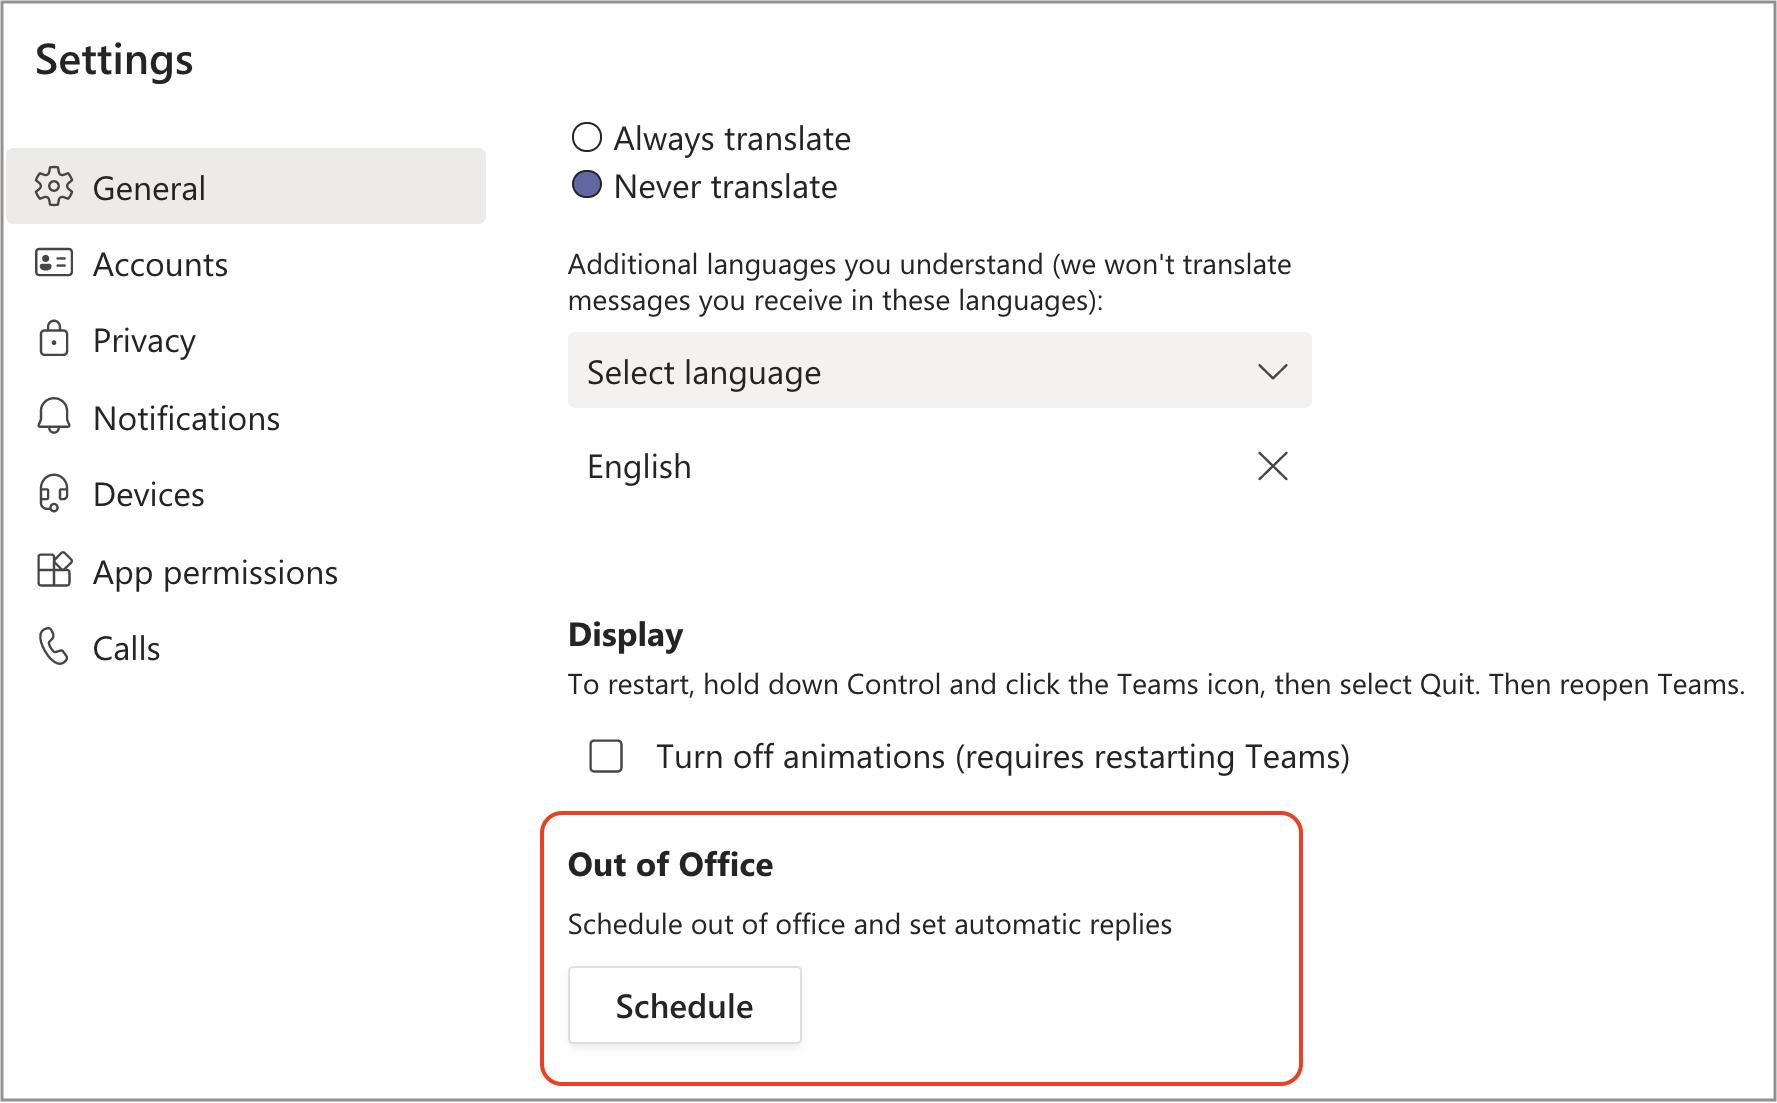 Schedule an out of office status in Microsoft Teams - Microsoft Support